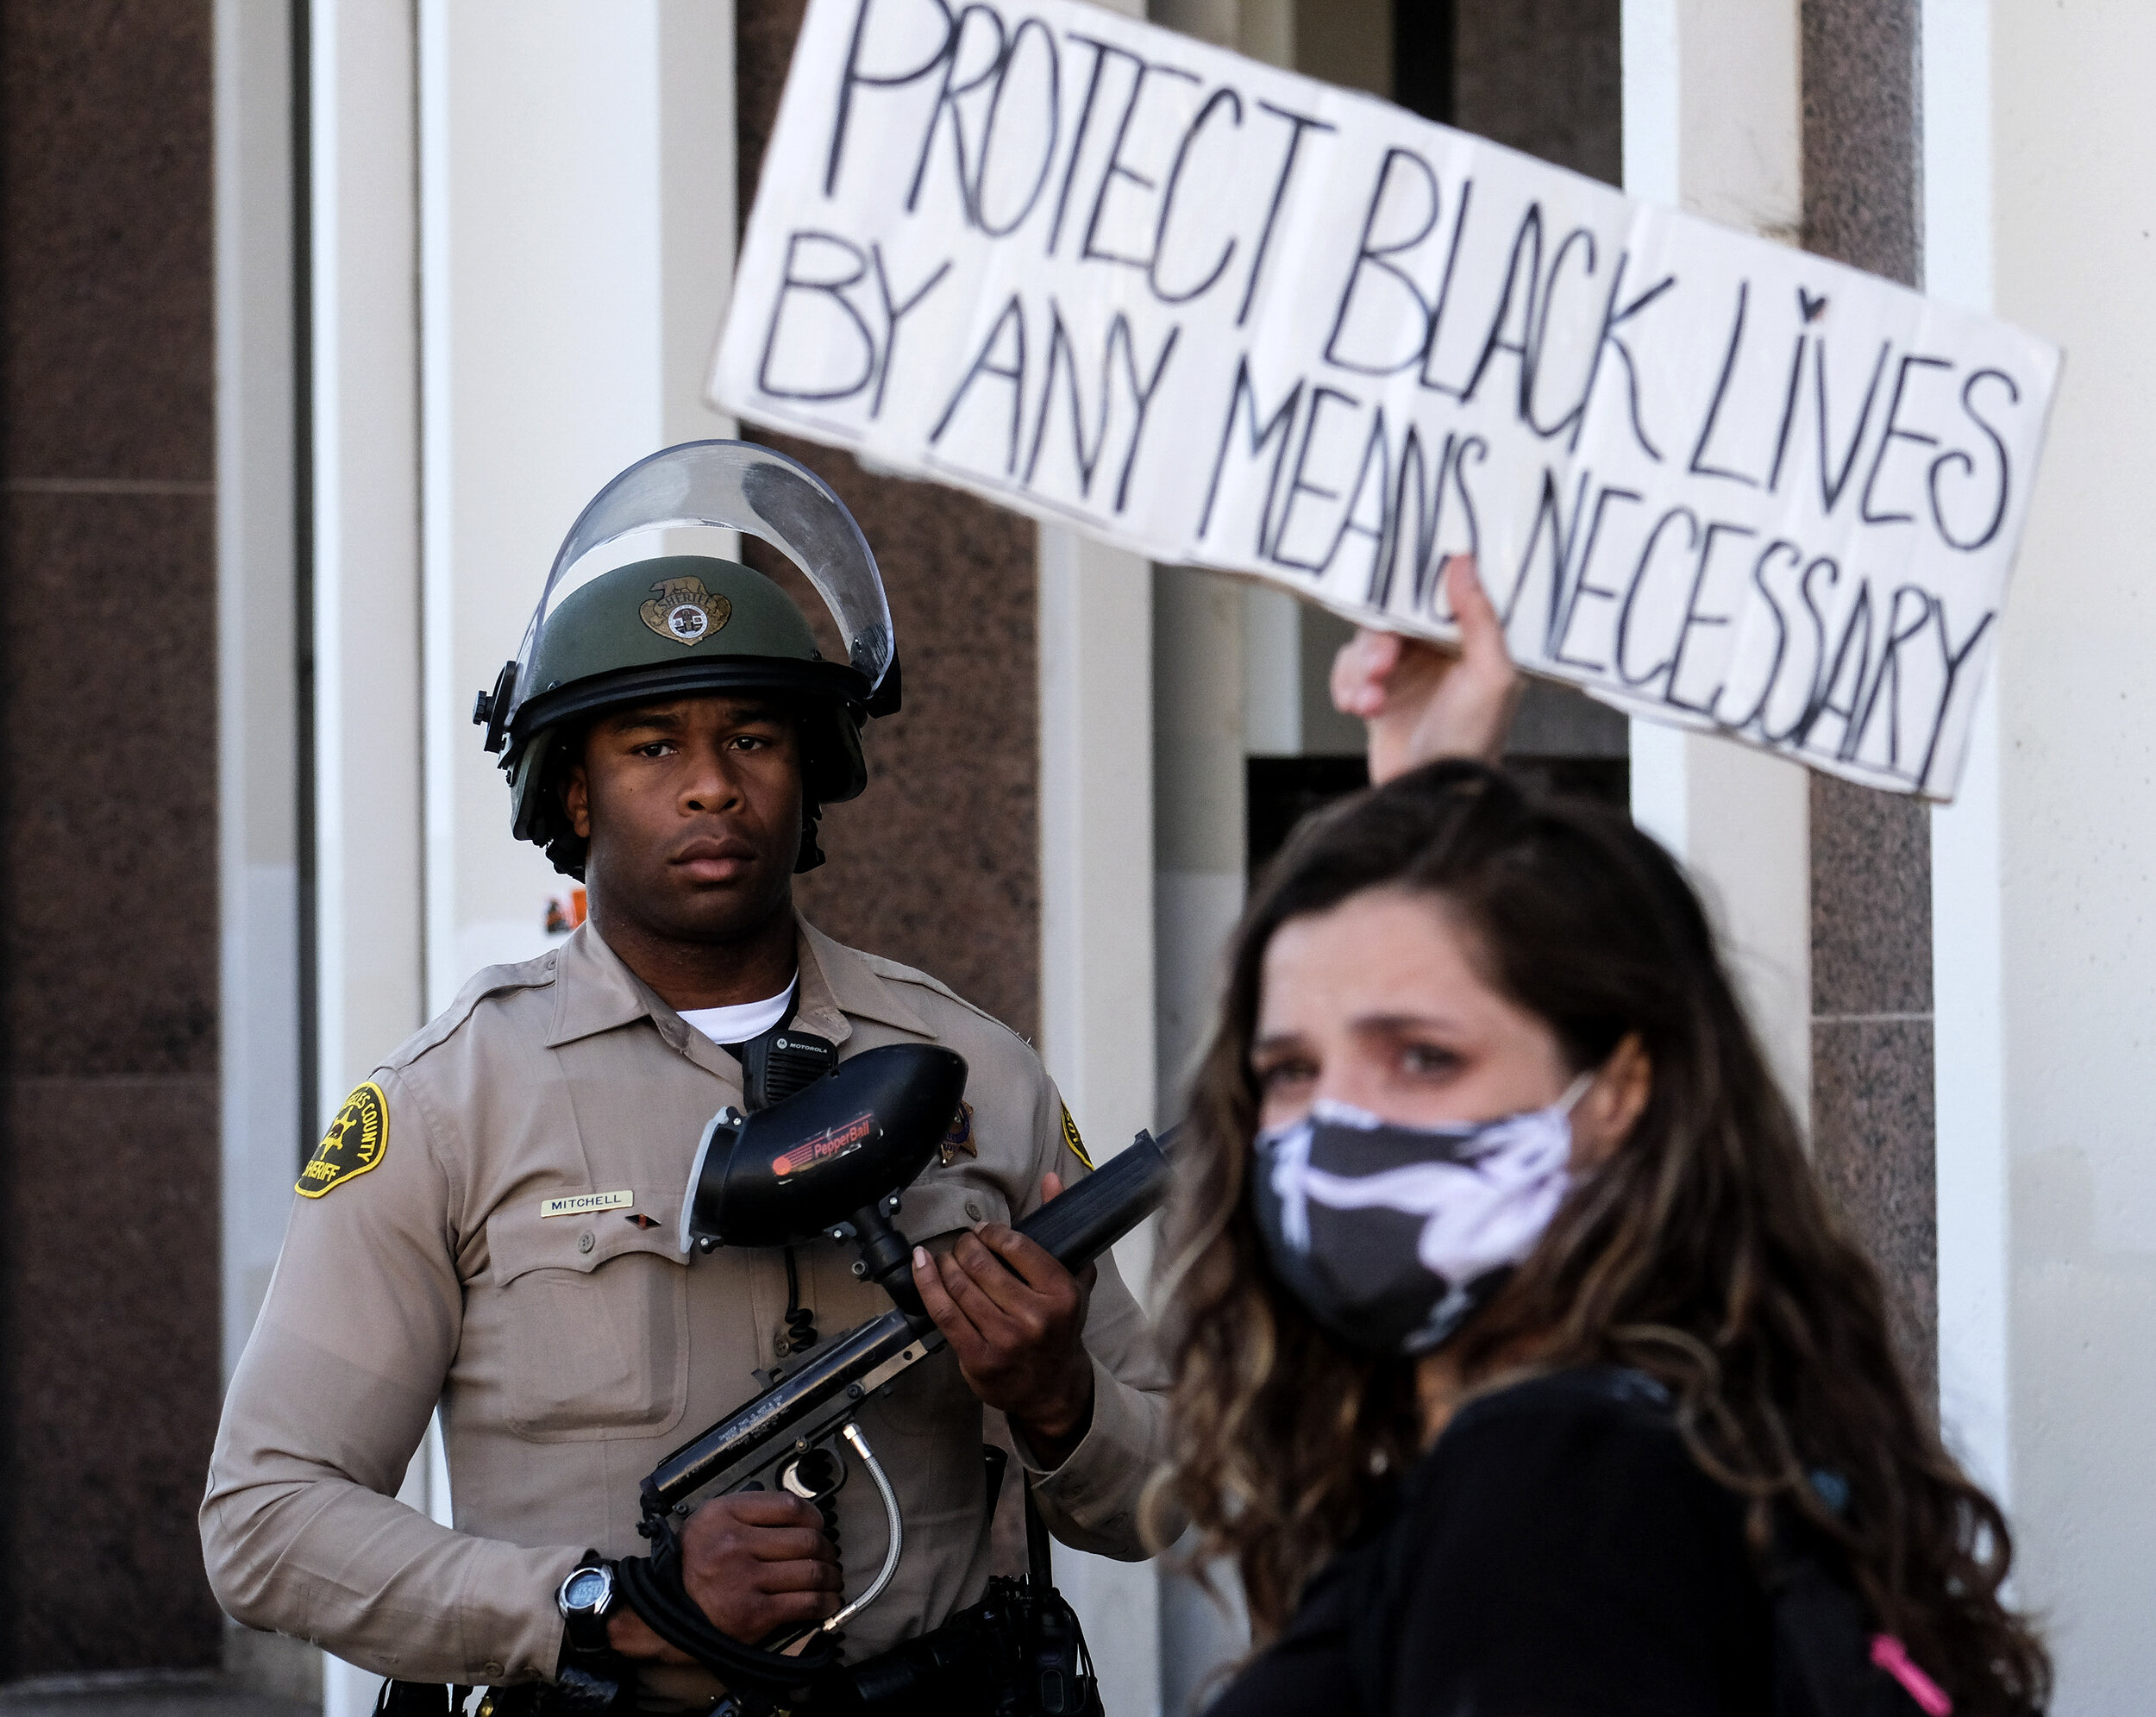  A demonstrator holding a sign stands against a Los Angeles County sheriff's deputy in a protest against the death of 18-year-old Andres Guardado and racial injustice in Compton, California, U.S., June 21, 2020.The 2020 Black Lives Matter protests ac